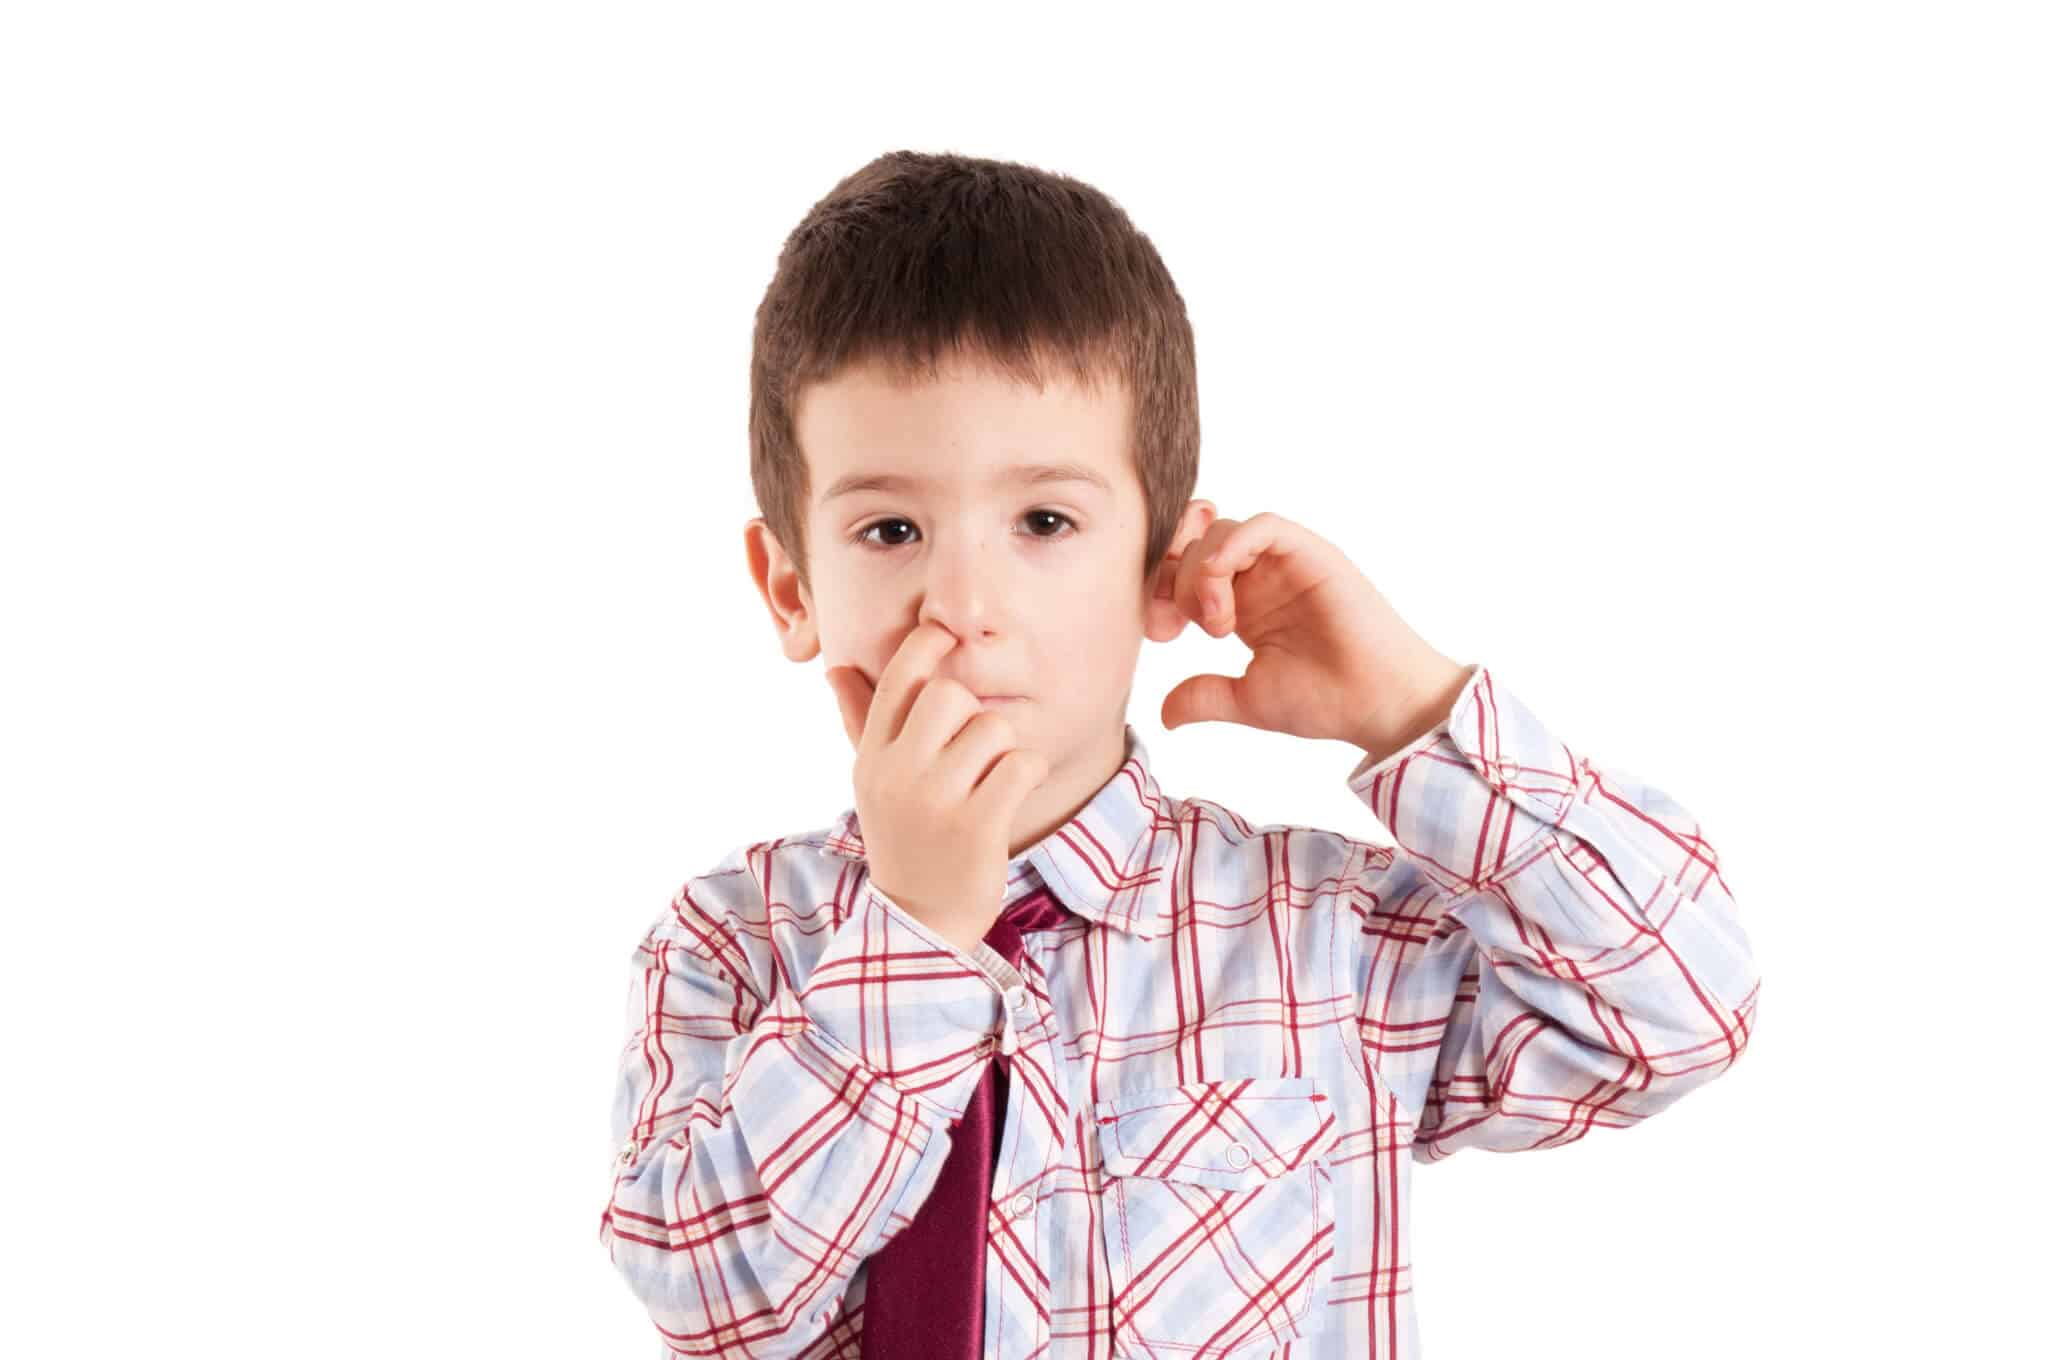 Q&A: Nose-Picking and Eating Buggers? ⋆ SensationalBrain